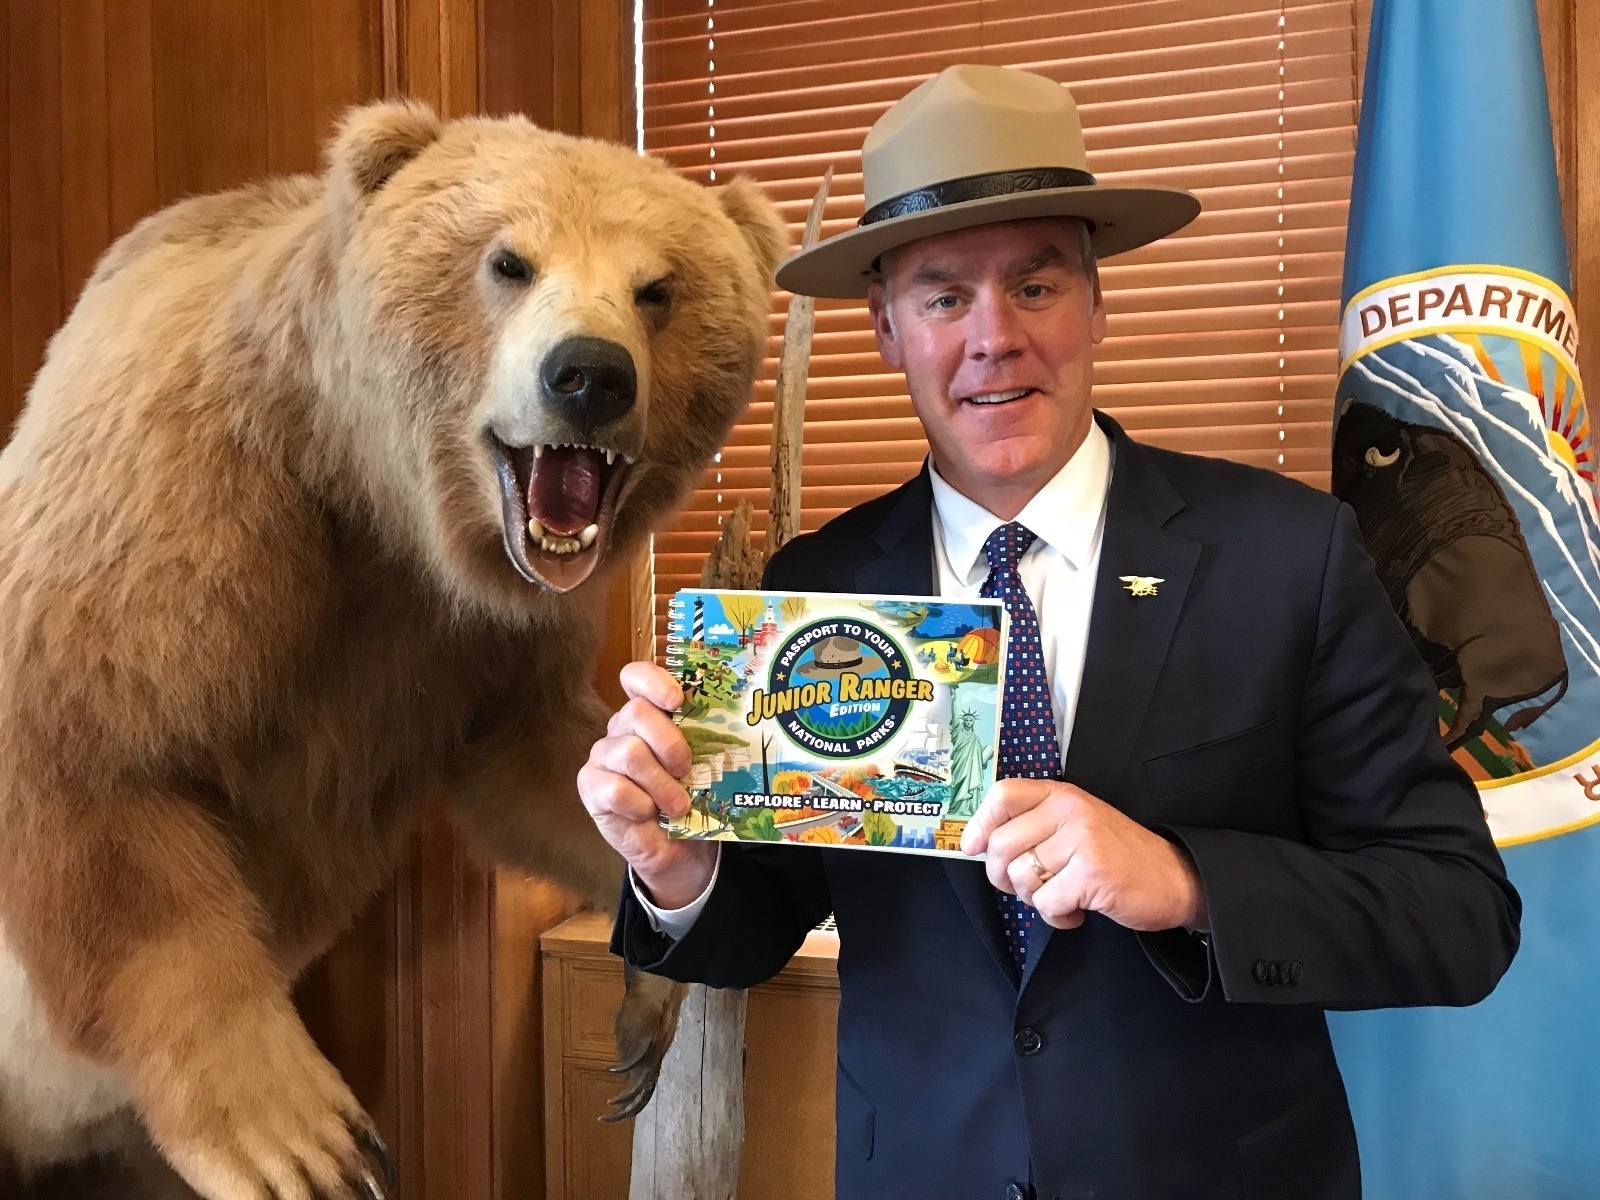 Master of photo-ops? Interior Secretary Ryan Zinke, already considered one of the most anti-conservation cabinet secretaries in modern U.S. history, poses for the camera.  Little did Zinke realize that he was wearing the official National Park Service hat backwards, a gesture considered offensive to those who have served in the ranks. Photo courtesy U.S. Department of Interior